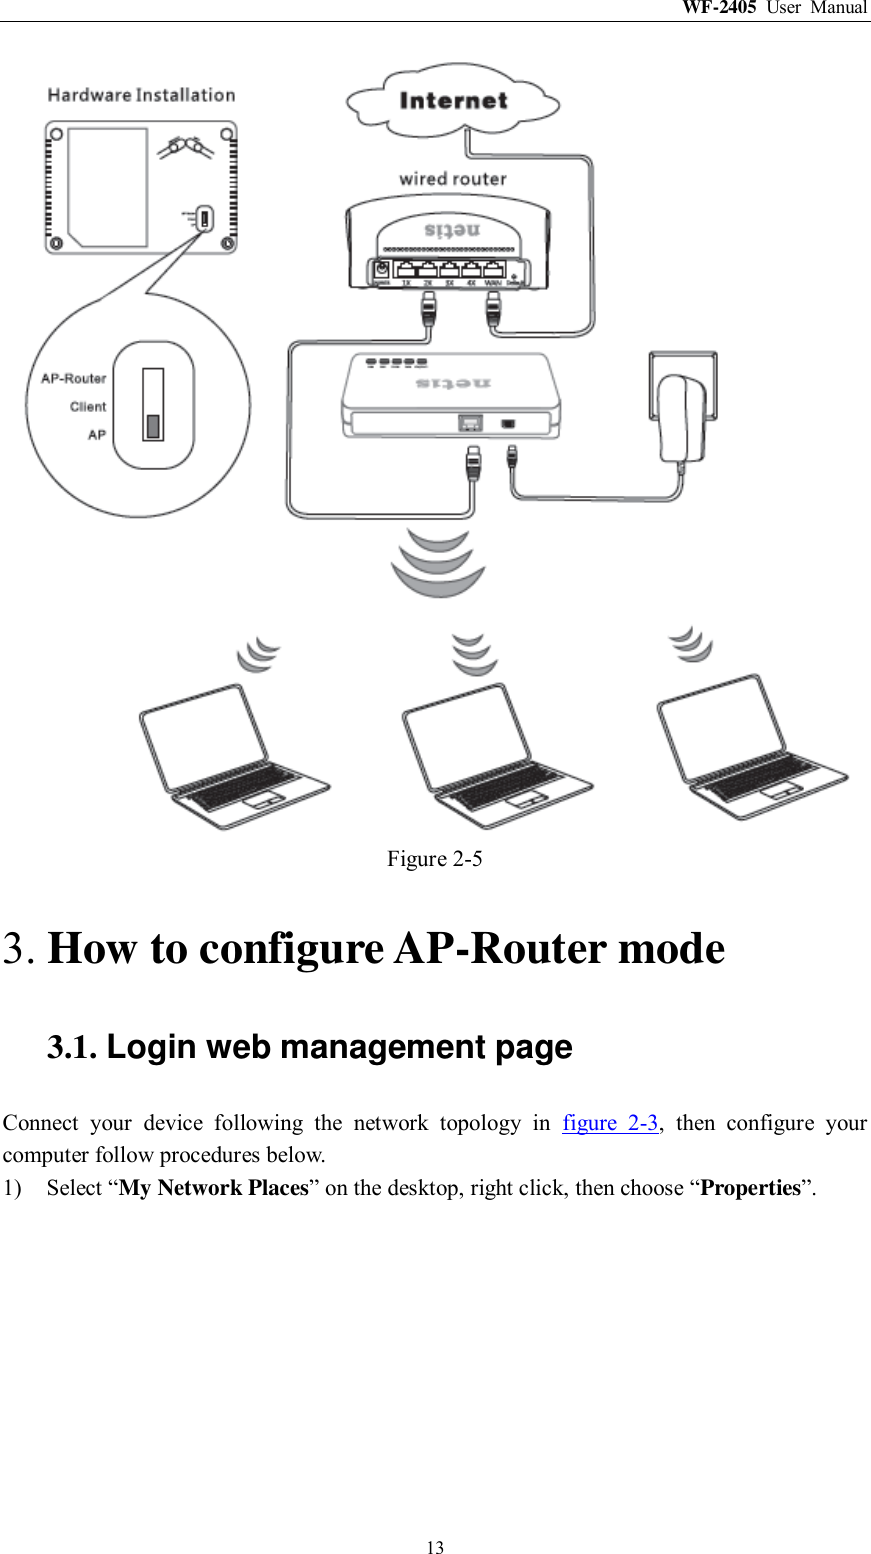 WF-2405  User  Manual  13  Figure 2-5 3. How to configure AP-Router mode 3.1. Login web management page Connect  your  device  following  the  network  topology  in  figure  2-3,  then  configure  your computer follow procedures below. 1) Select “My Network Places” on the desktop, right click, then choose “Properties”. 